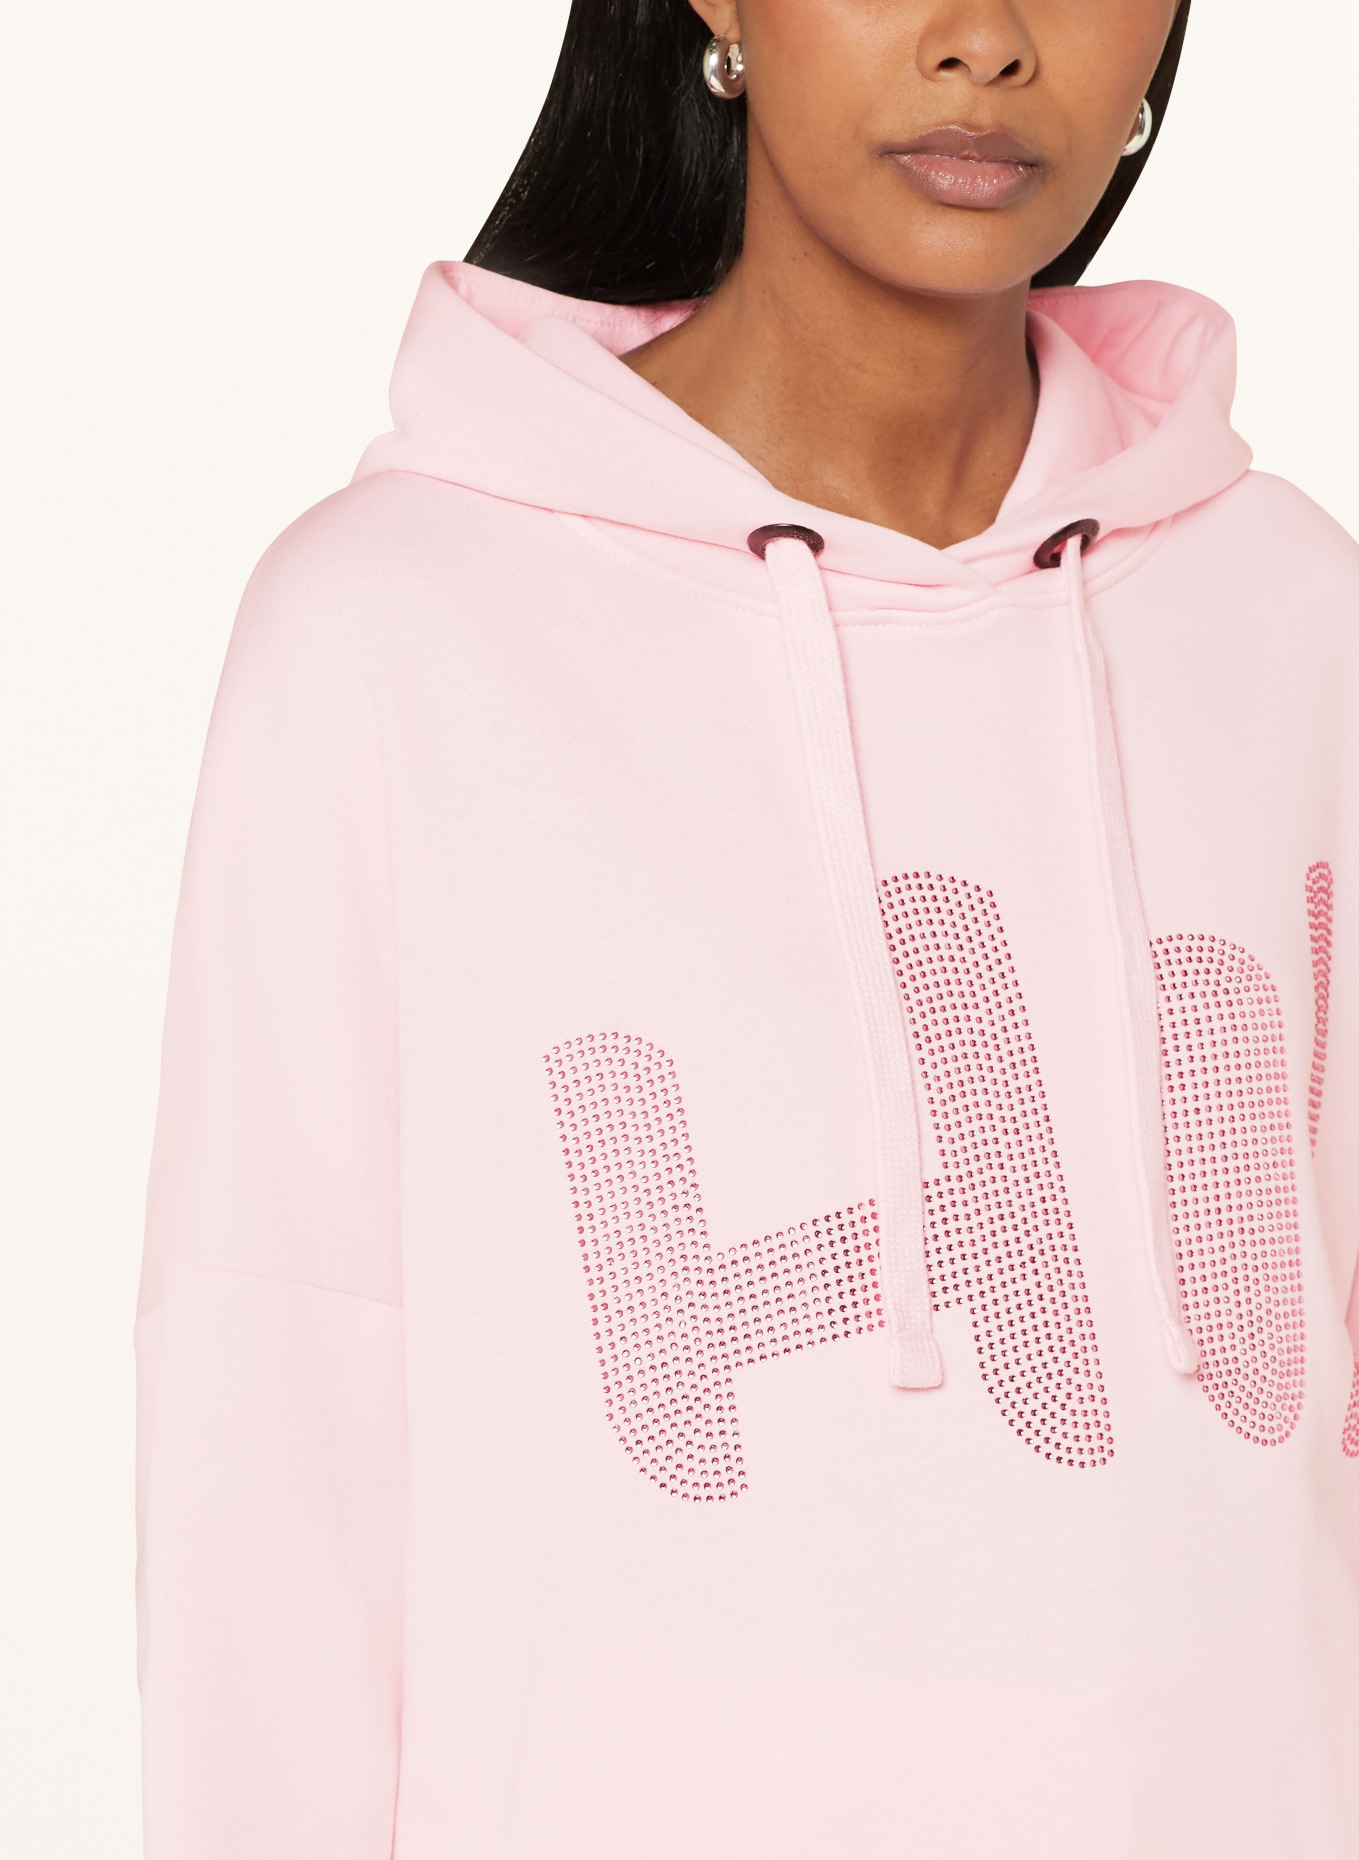 miss goodlife Hoodie with decorative gems, Color: PINK (Image 5)